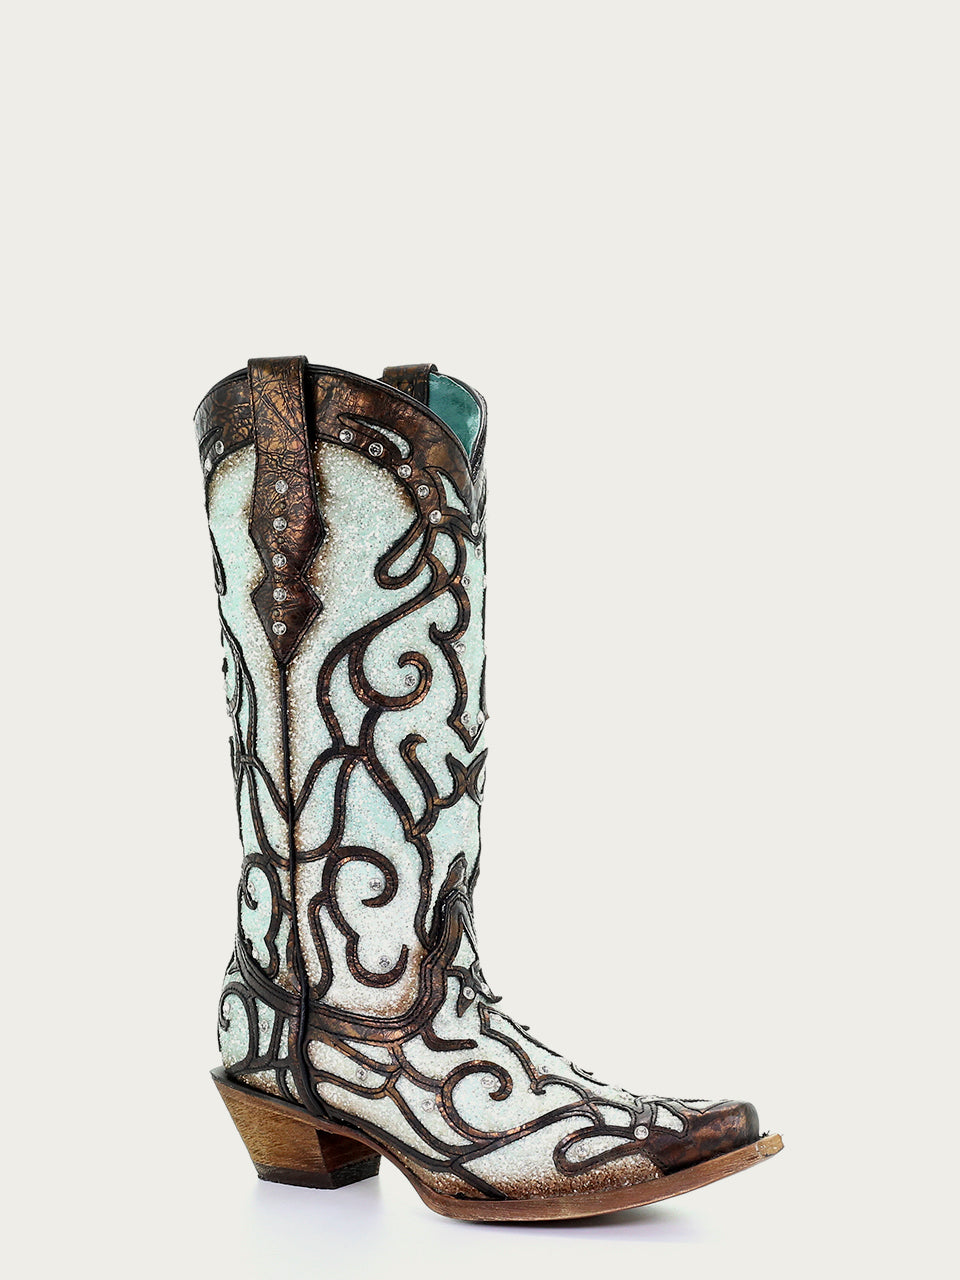 C3460 -Corral Boots - Ladies sky blue glitter & studs side view